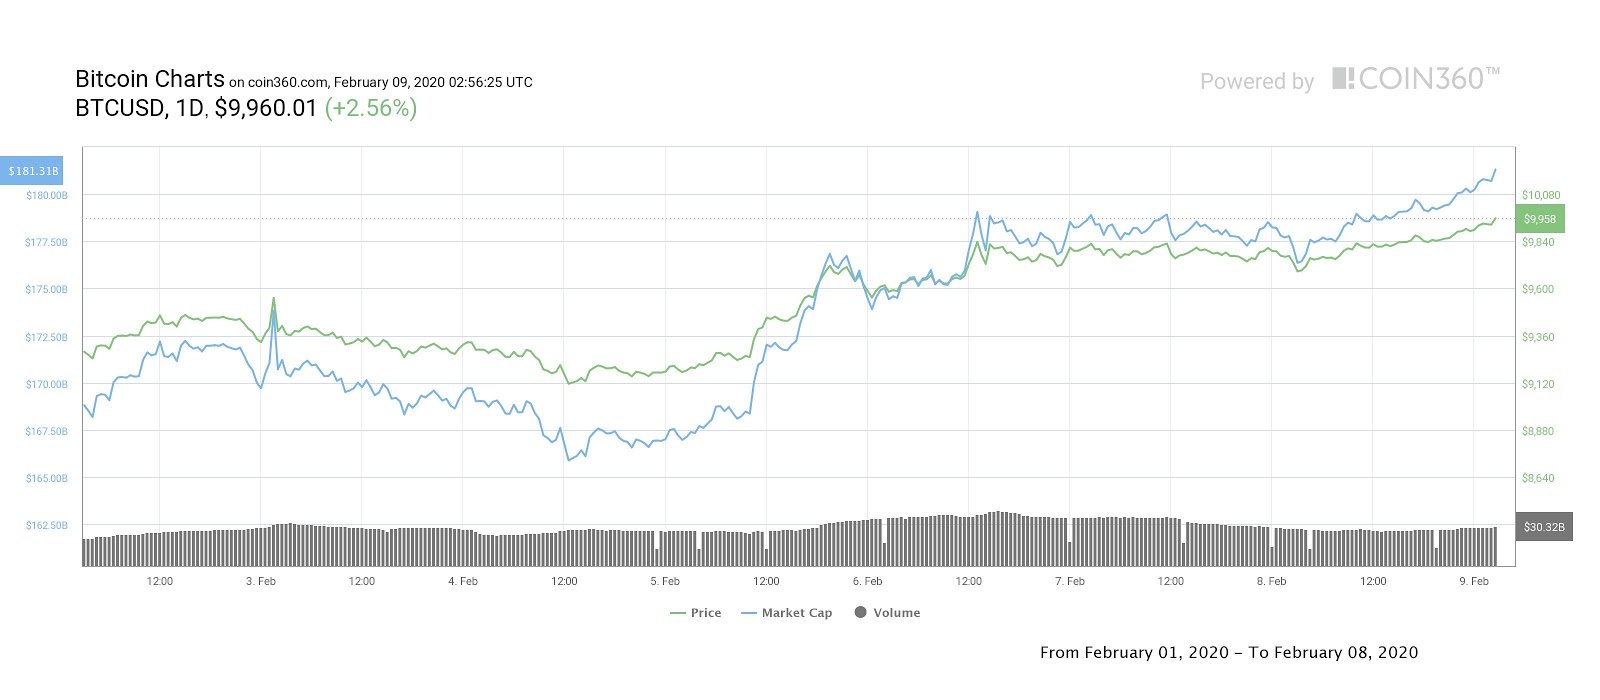 Bitcoin weekly price chart. Source: Coin360